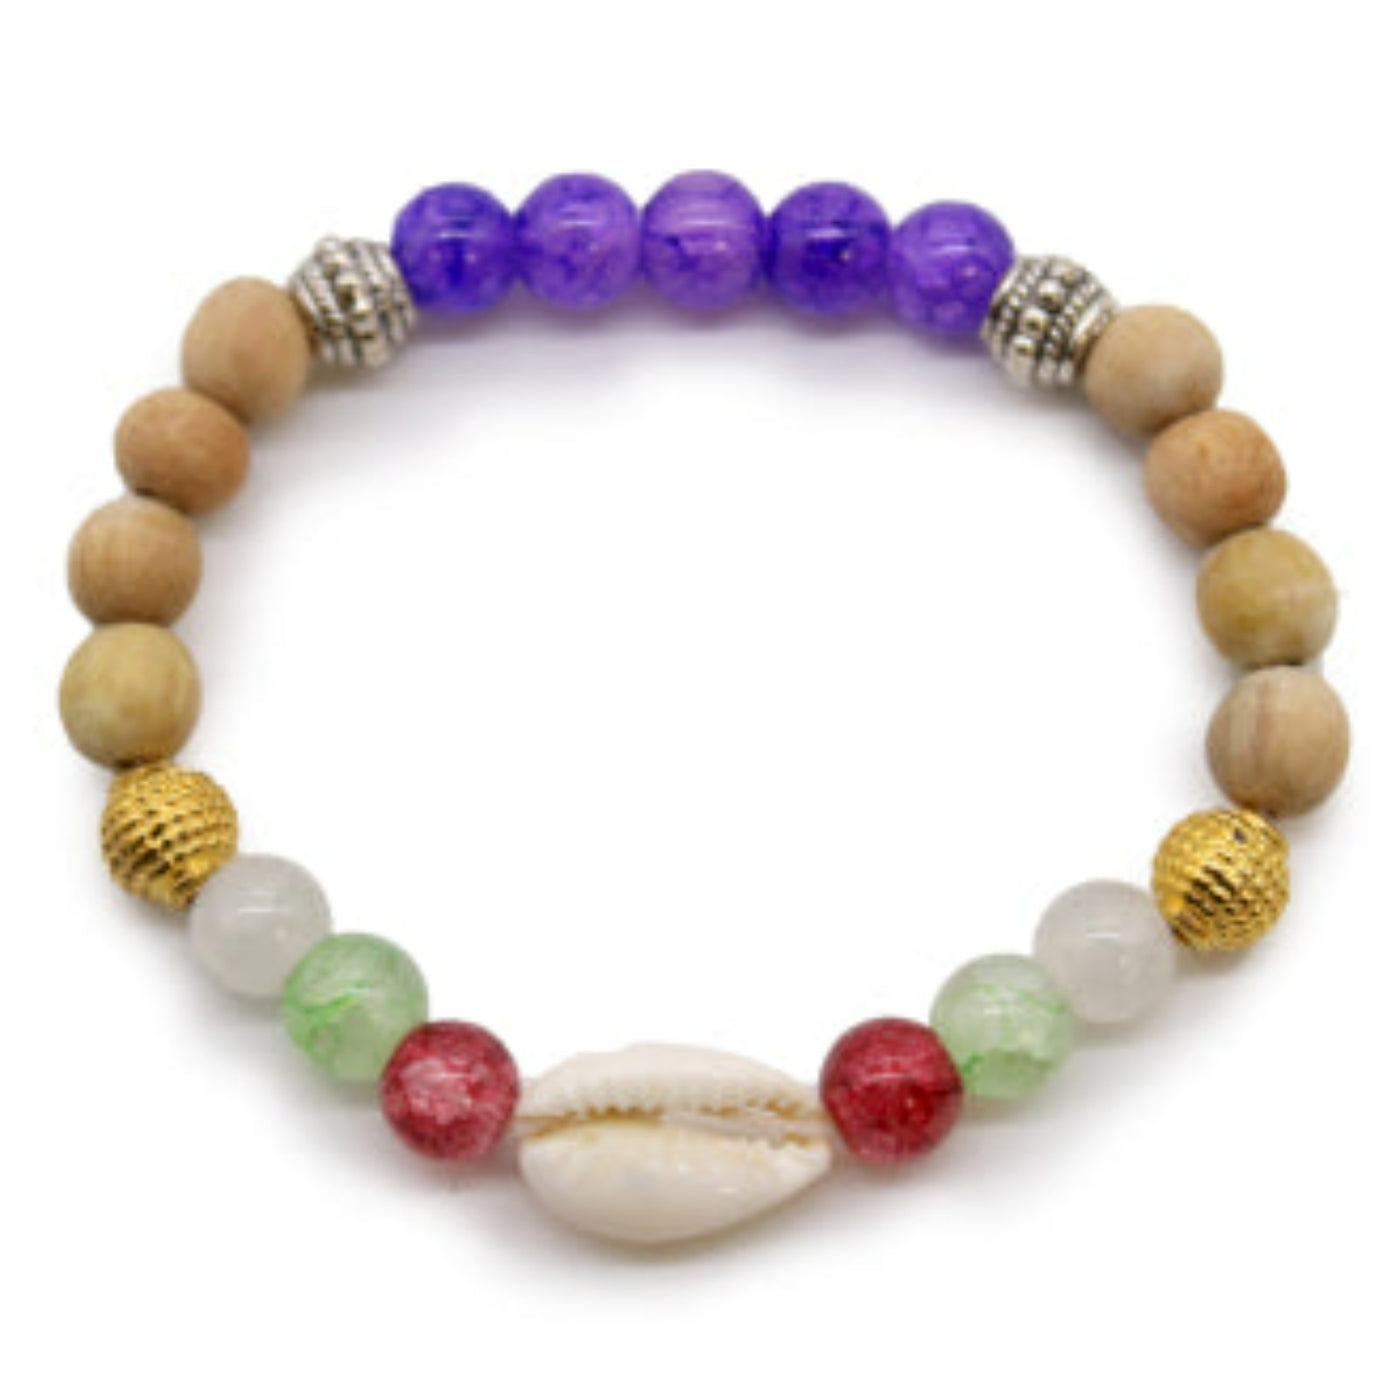 Beauty And Wisdom Bracelet With Stone Glass Wooden Beads & Seashell